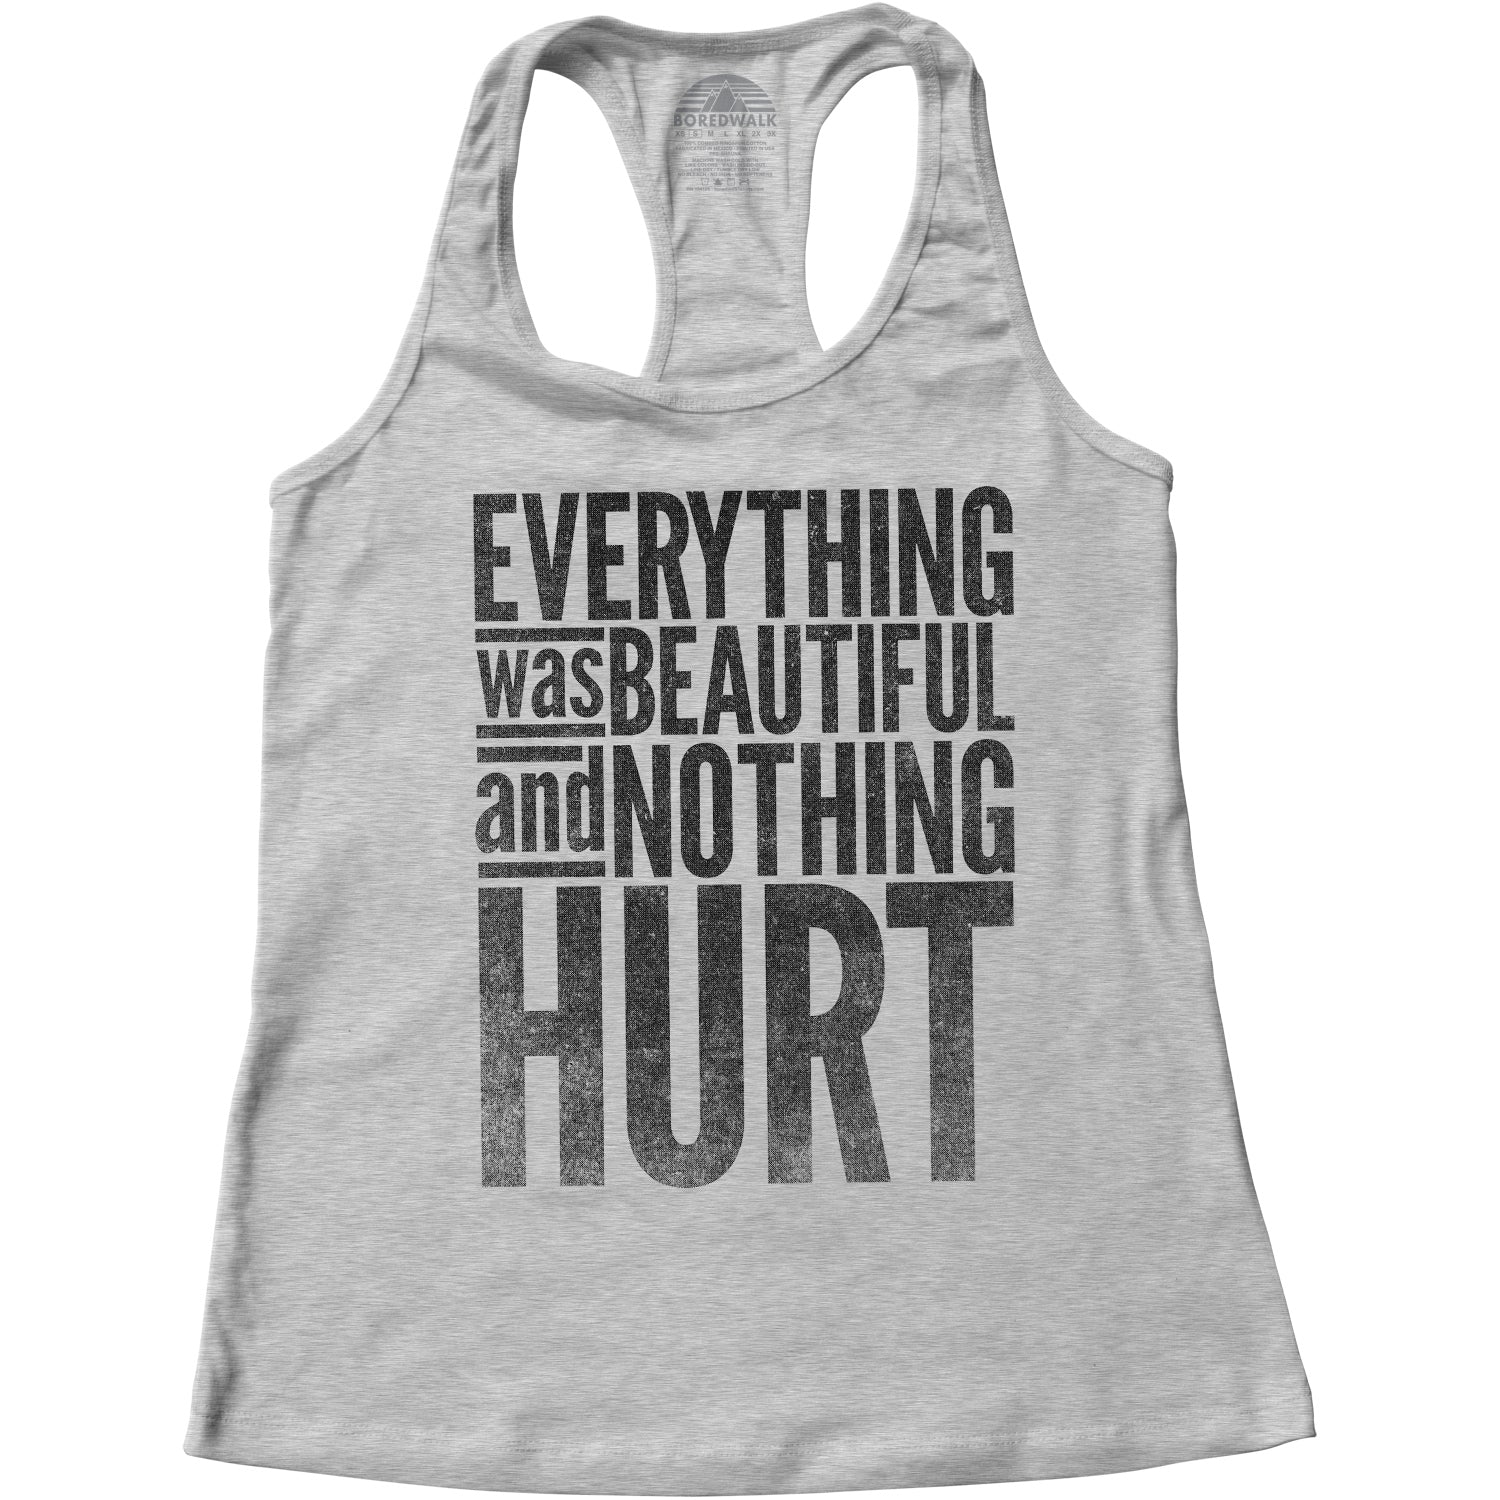 Women's Everything Was Beautiful and Nothing Hurt Racerback Tank Top